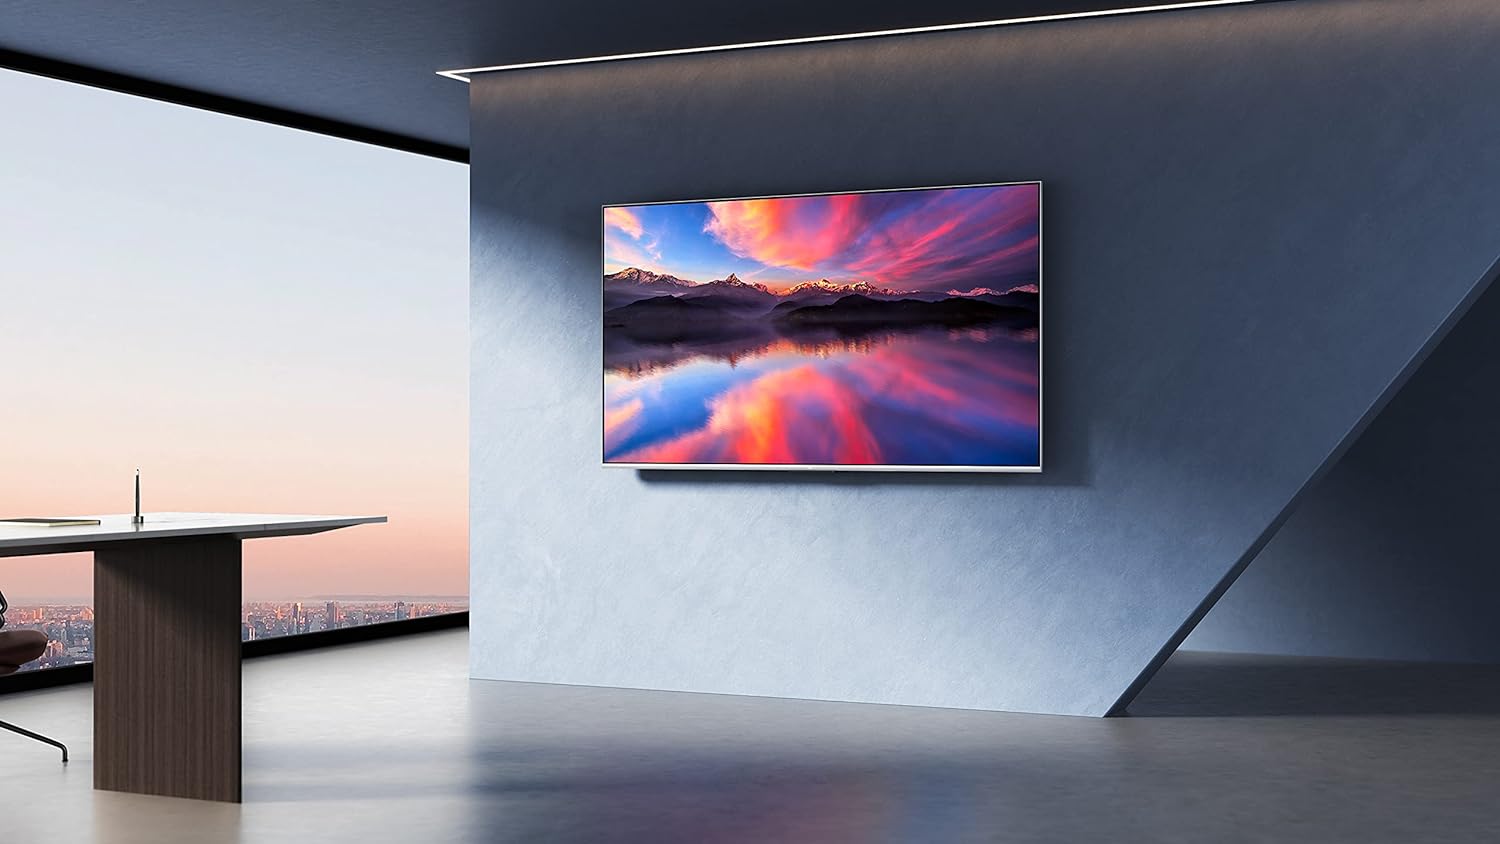 Xiaomi tv 75-Inch QLED 4K HDR10+ Smart Android TV L75M6-ESG